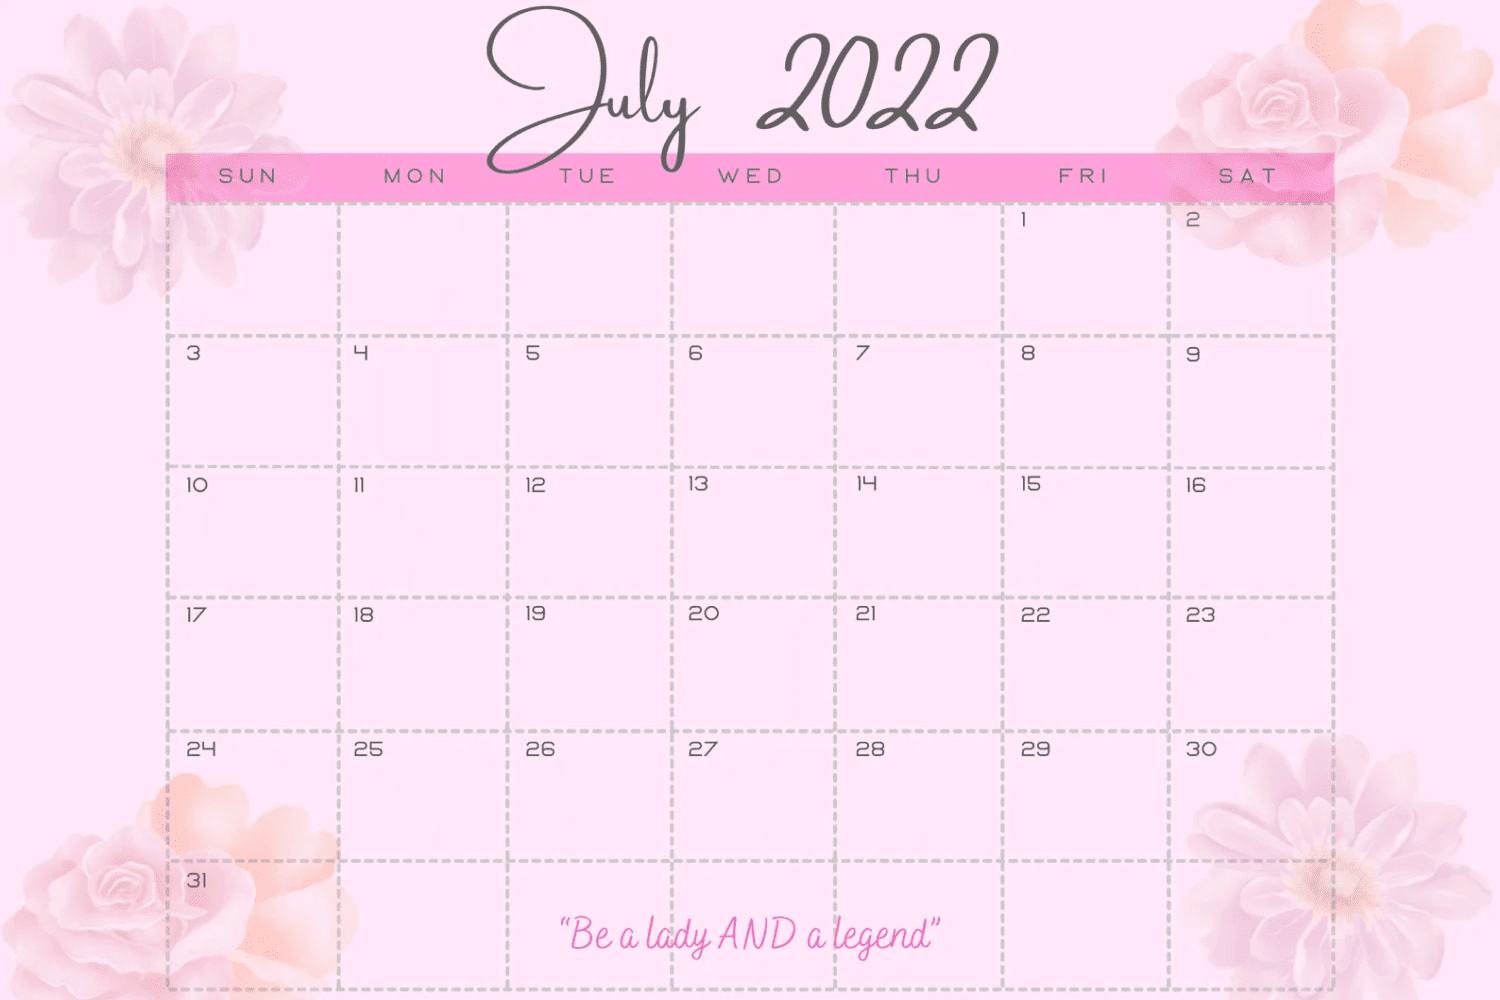 Calendar in pink colors with flowers on the background.